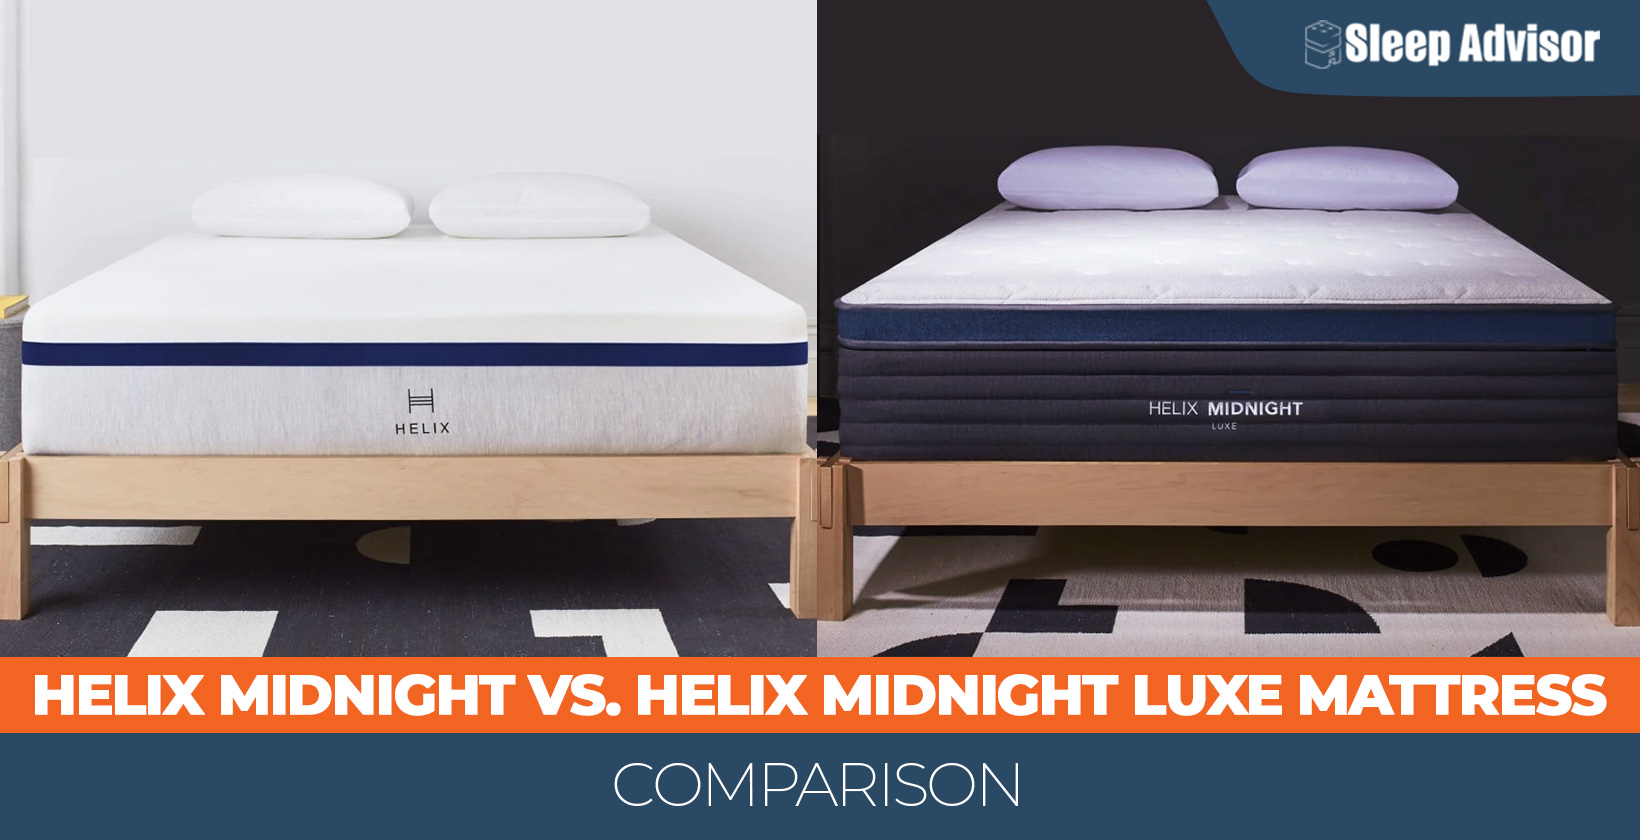 Helix Midnight versus Helix Midnight Luxe compared